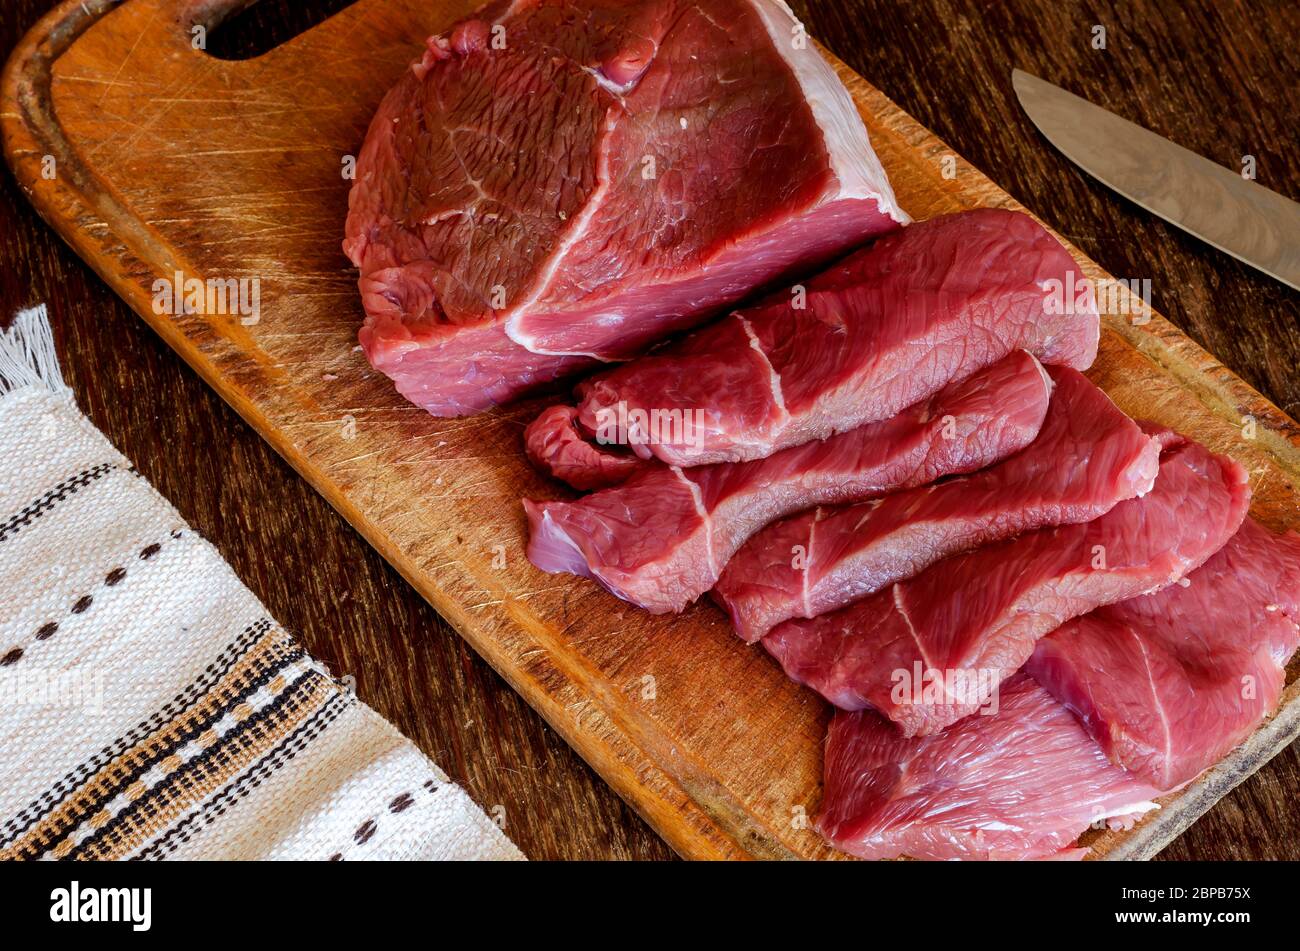 https://c8.alamy.com/comp/2BPB75X/portioned-slices-of-raw-meat-on-a-cutting-board-fresh-pieces-of-chopped-beef-tenderloin-close-up-five-juicy-slices-of-beef-ingredients-for-preparin-2BPB75X.jpg